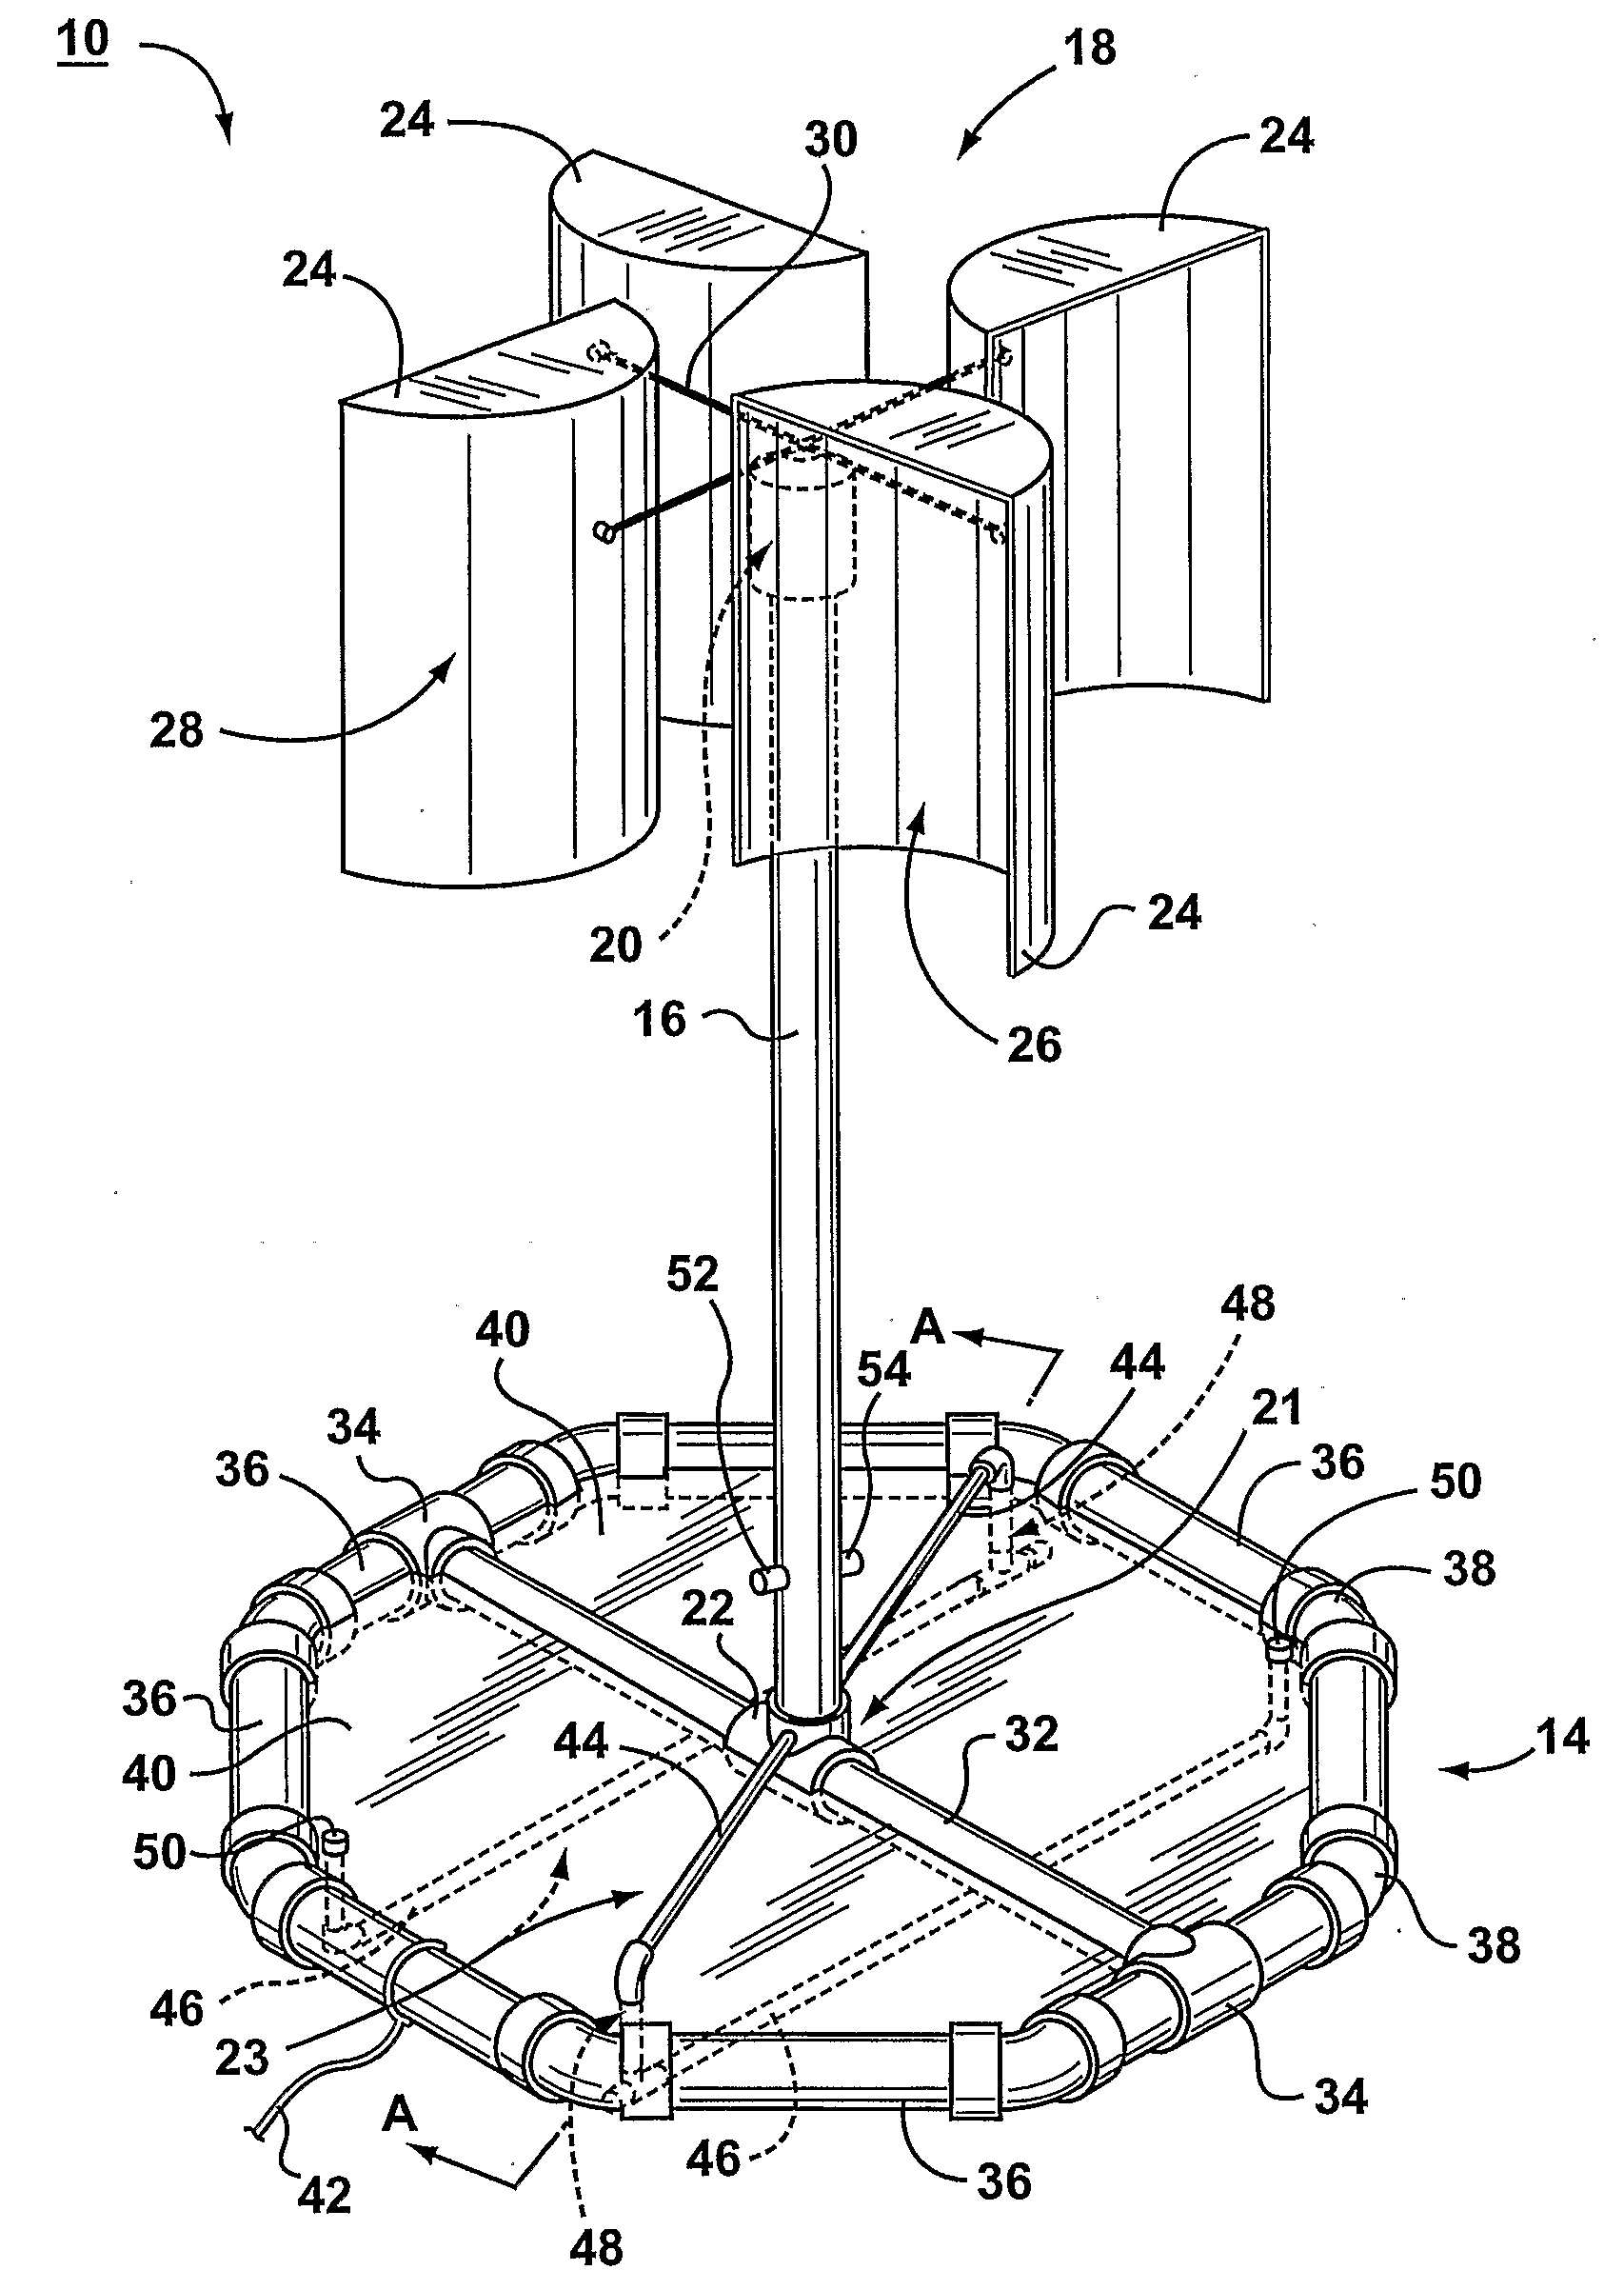 Apparatus For Production of Hydrogen Gas Using Wind and Wave Action